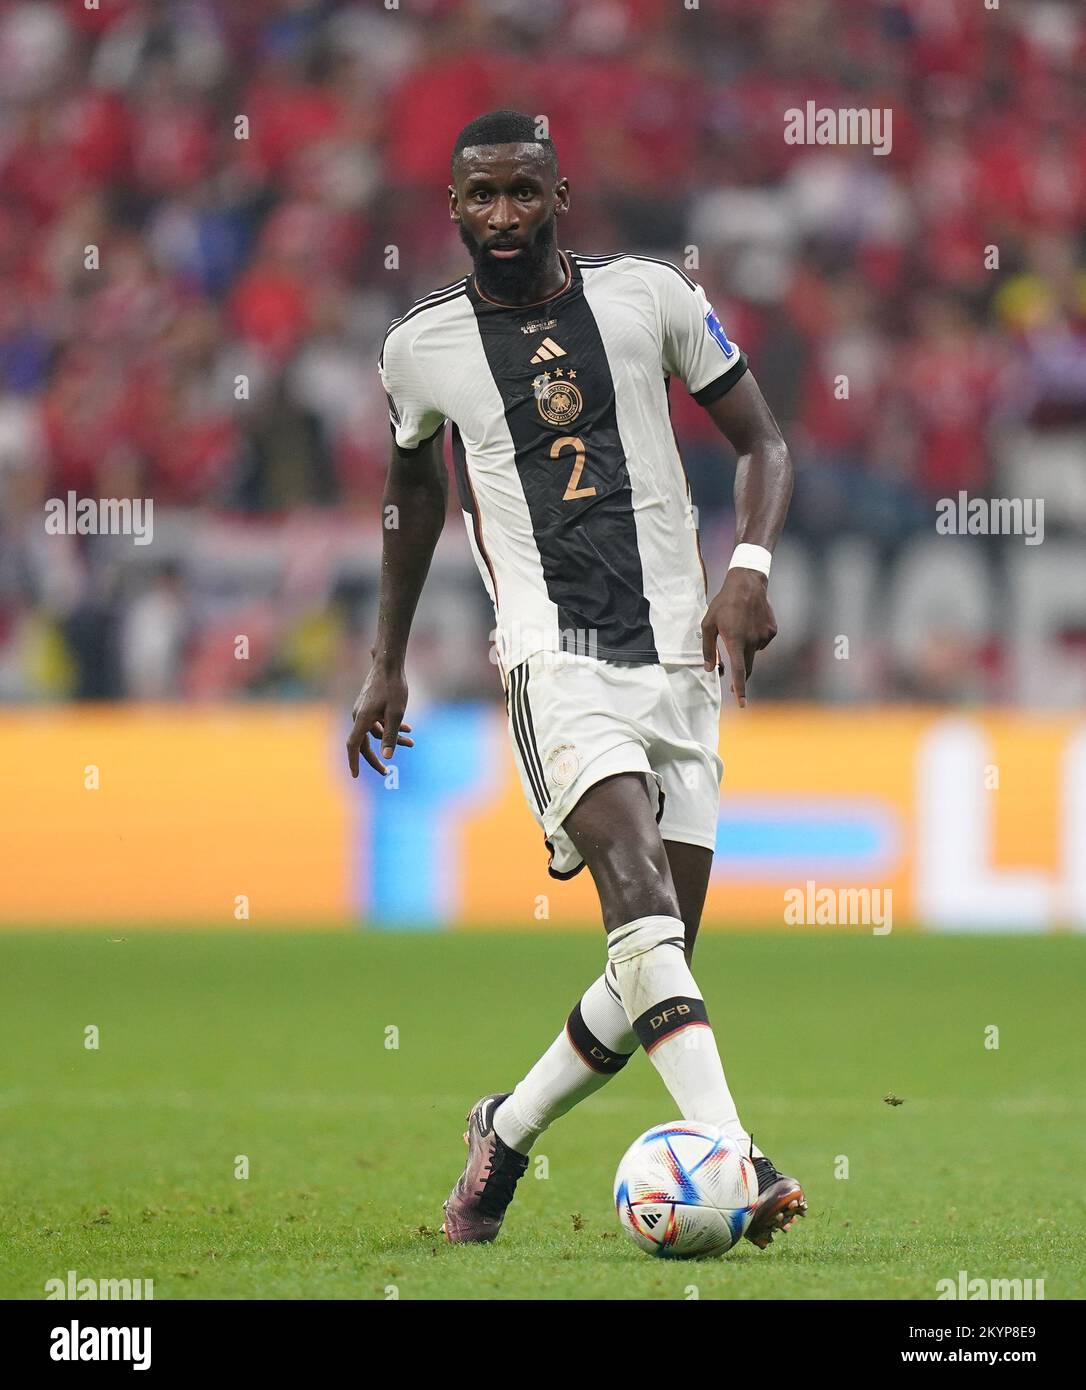 Germany's Antonio Ruediger during the FIFA World Cup Group E match at the Al Bayt Stadium, Al Khor, Qatar. Picture date: Thursday December 1, 2022. Stock Photo